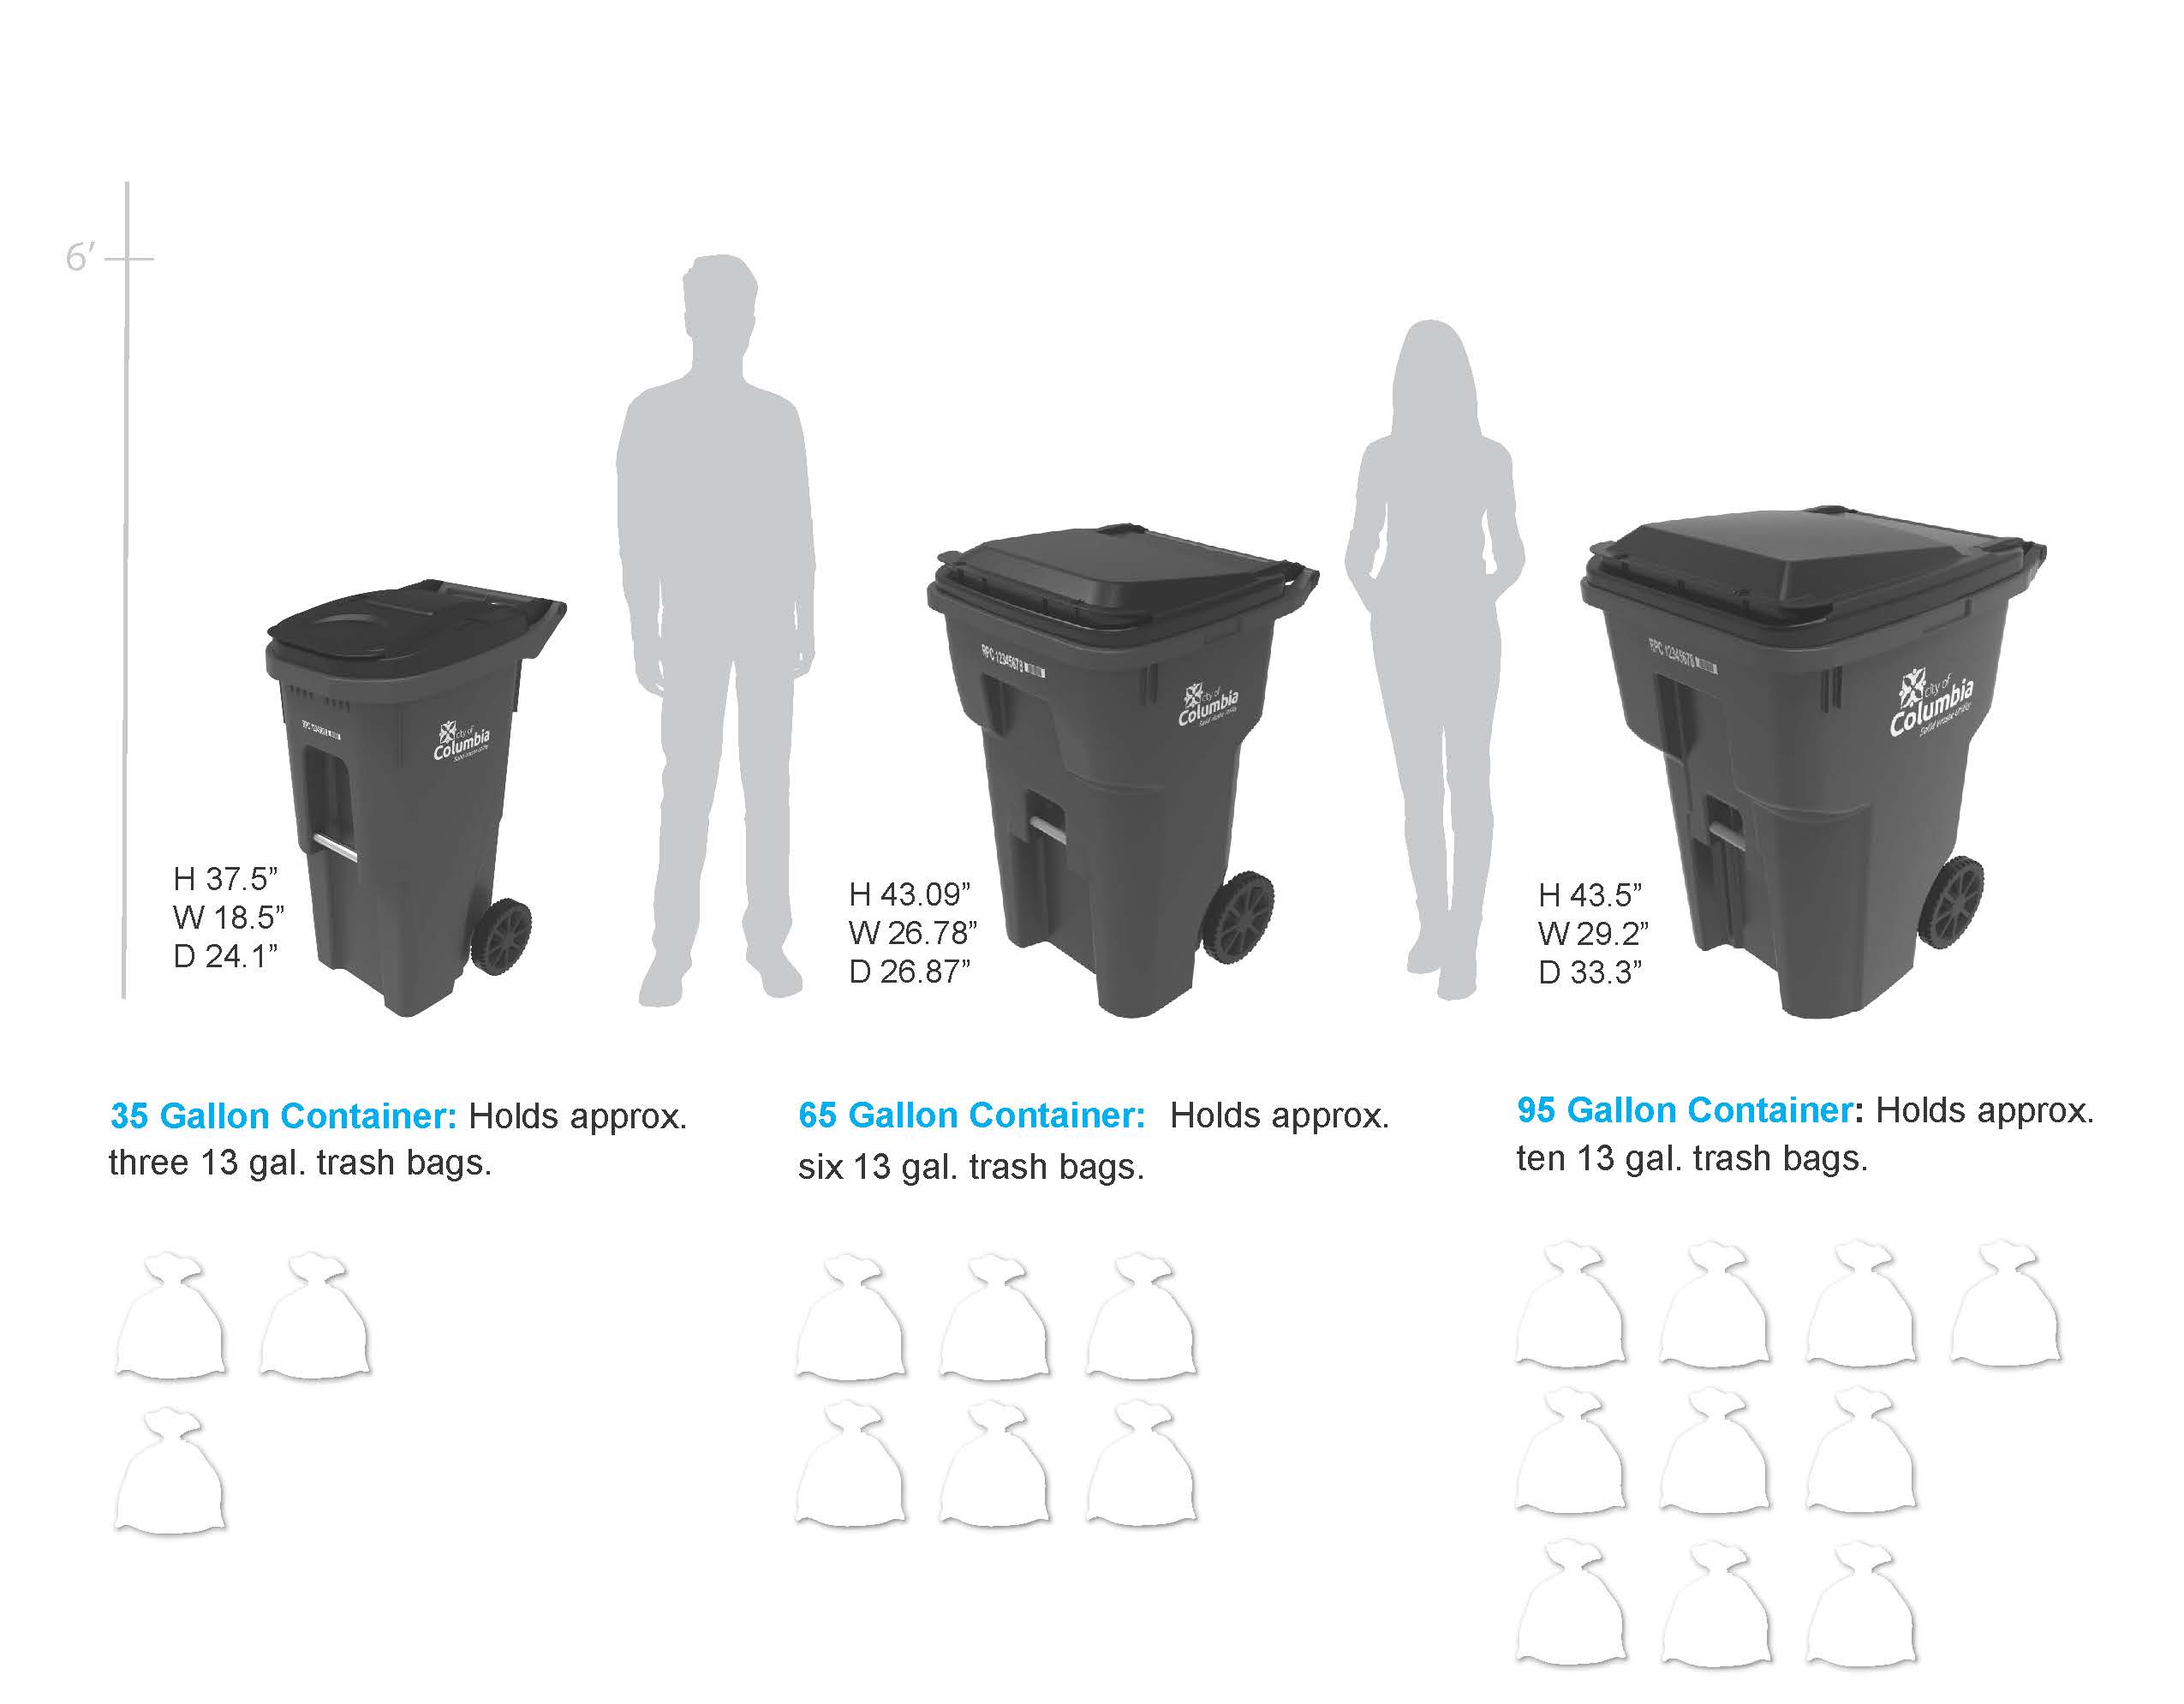 How to Select Garbage Bags for Efficient Hotel Waste Management